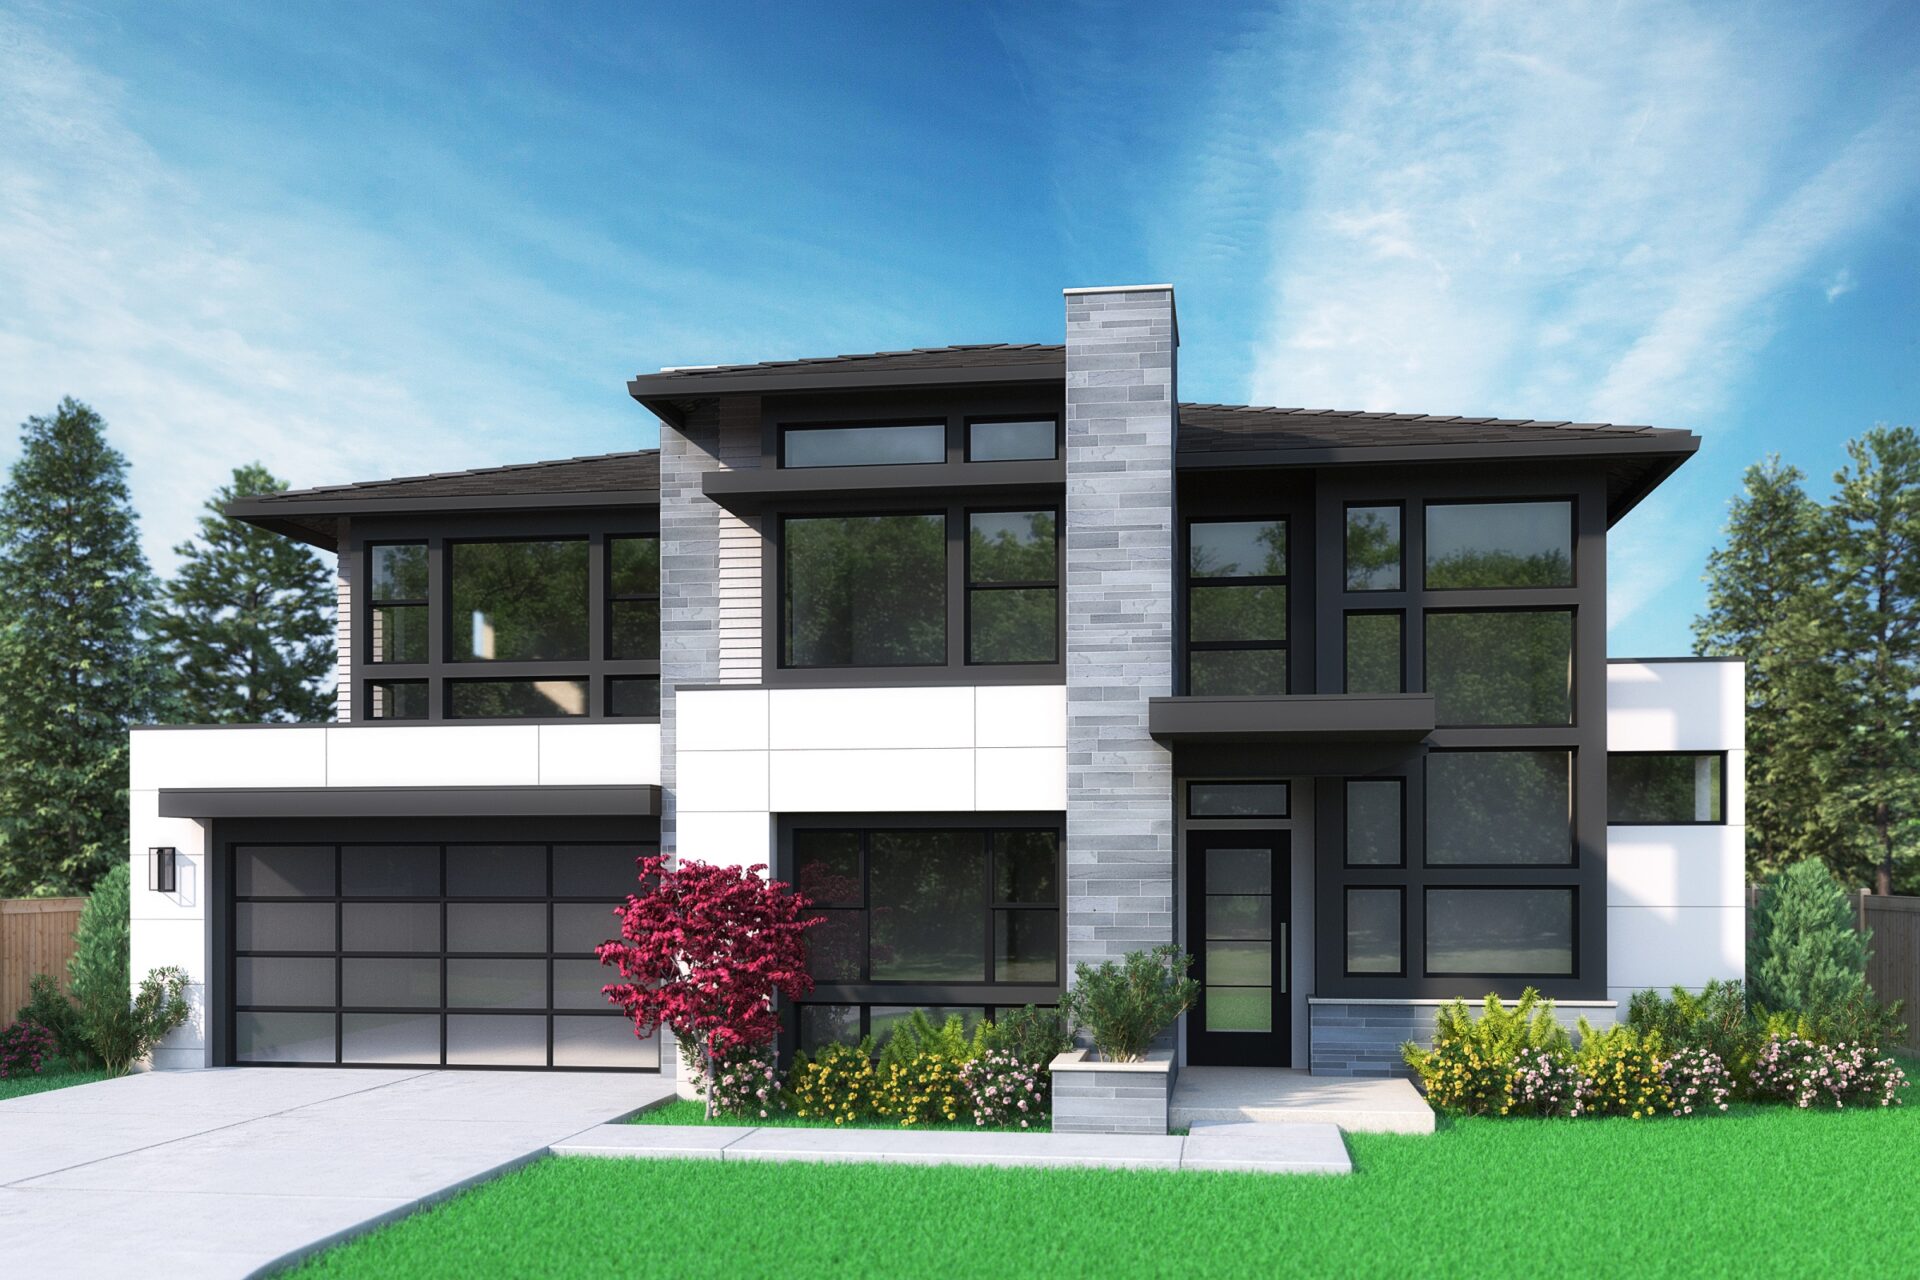 View our new luxury home construction on 14309 SE 38th St, in Bellevue, WA from MN Custom Homes